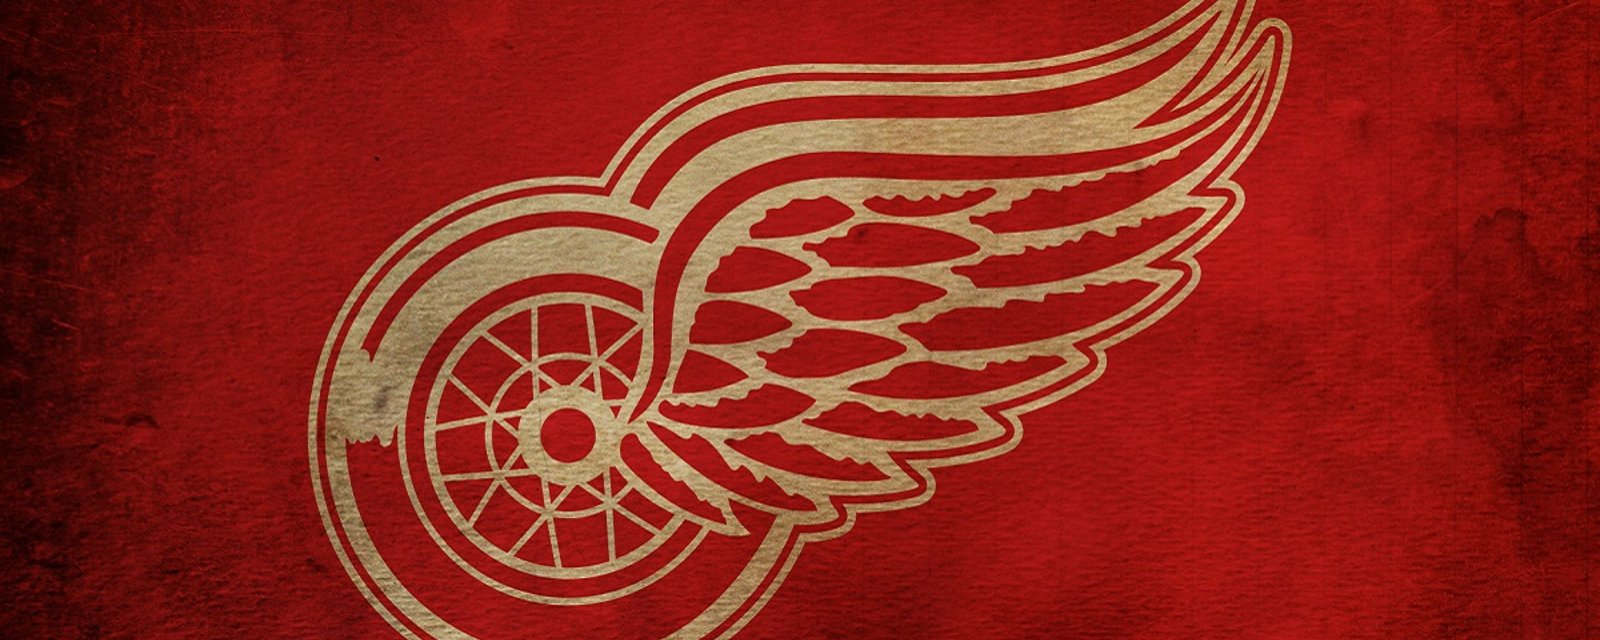 Breaking: Red Wings unveil two new Adidas jerseys.